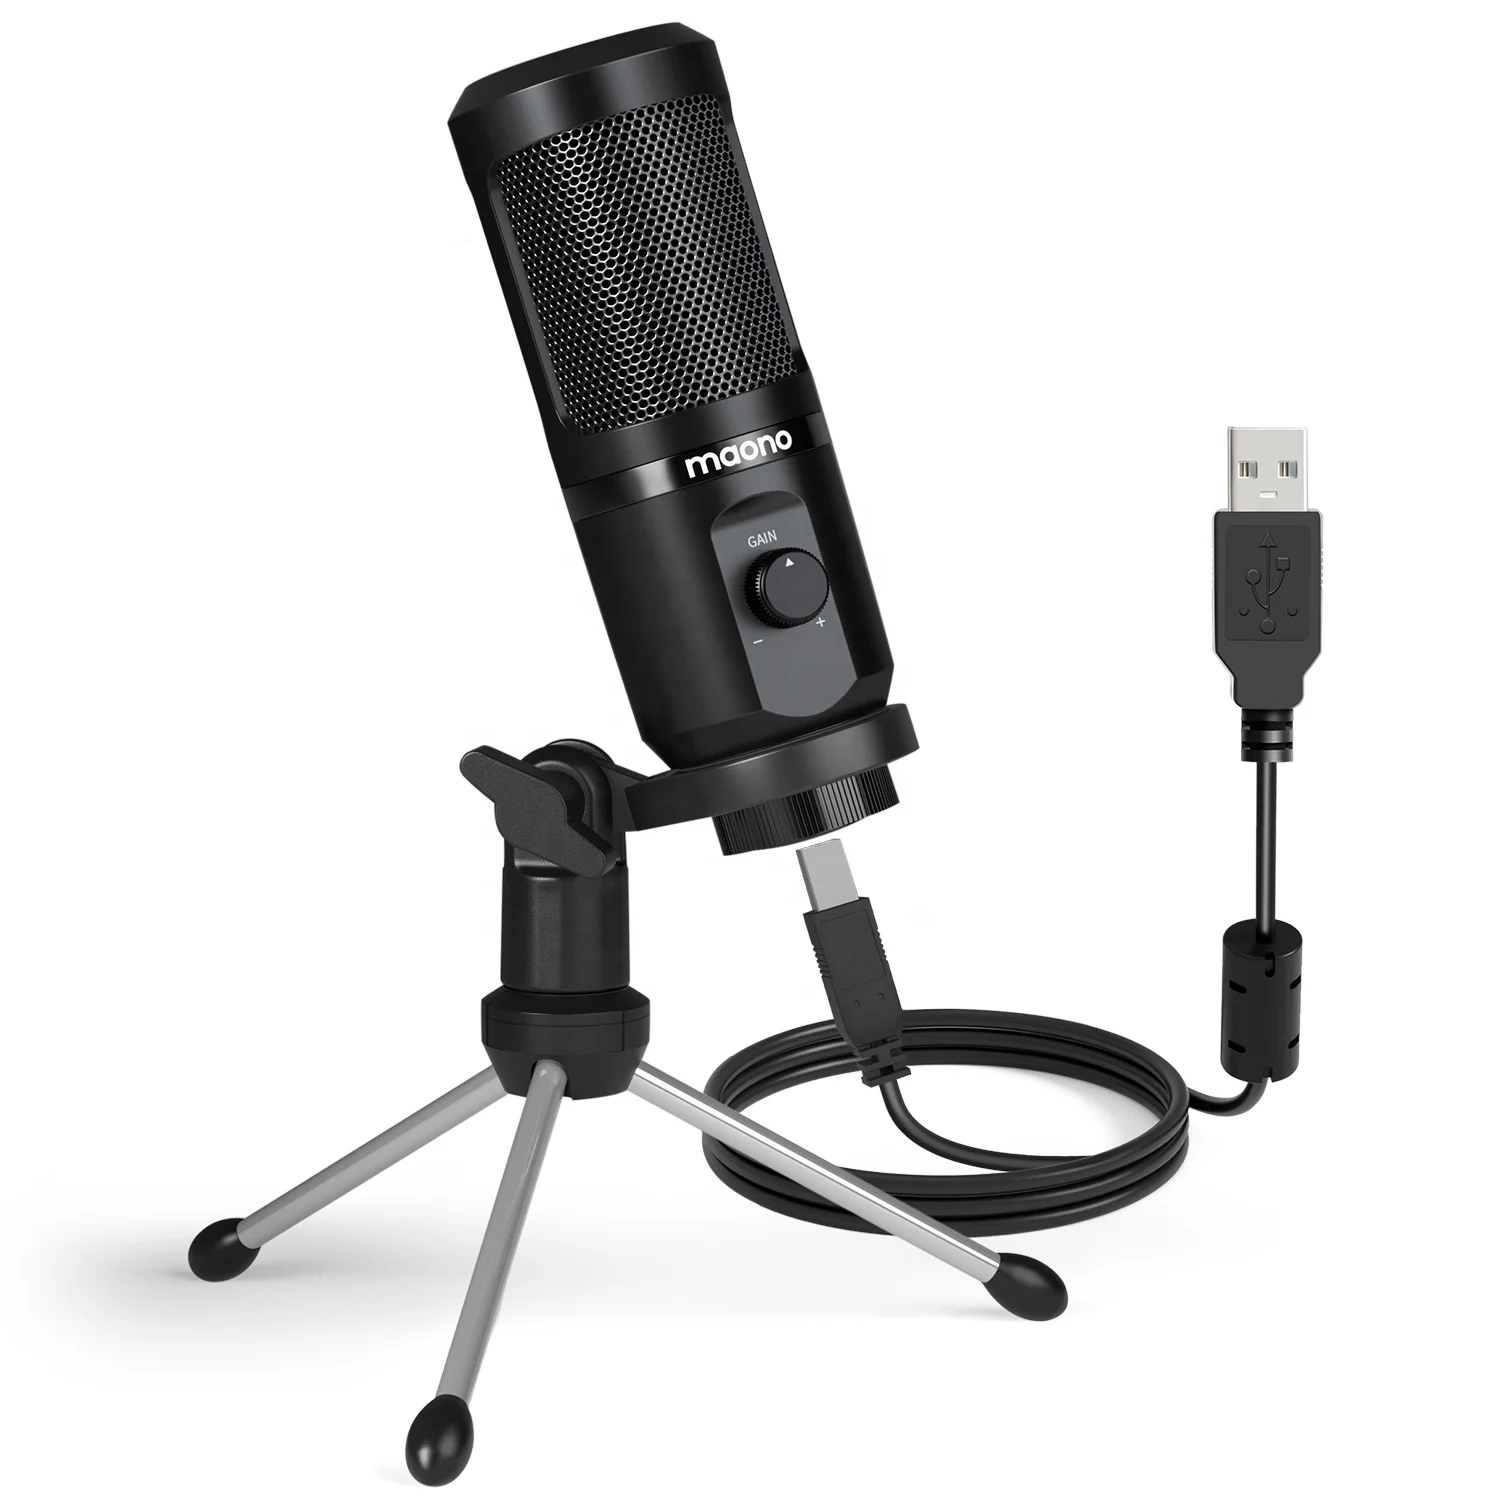 

MAONO Studio Microphone Condenser USB Microfone with Microphone Gain for Recording Broadcasting Recording Microphone